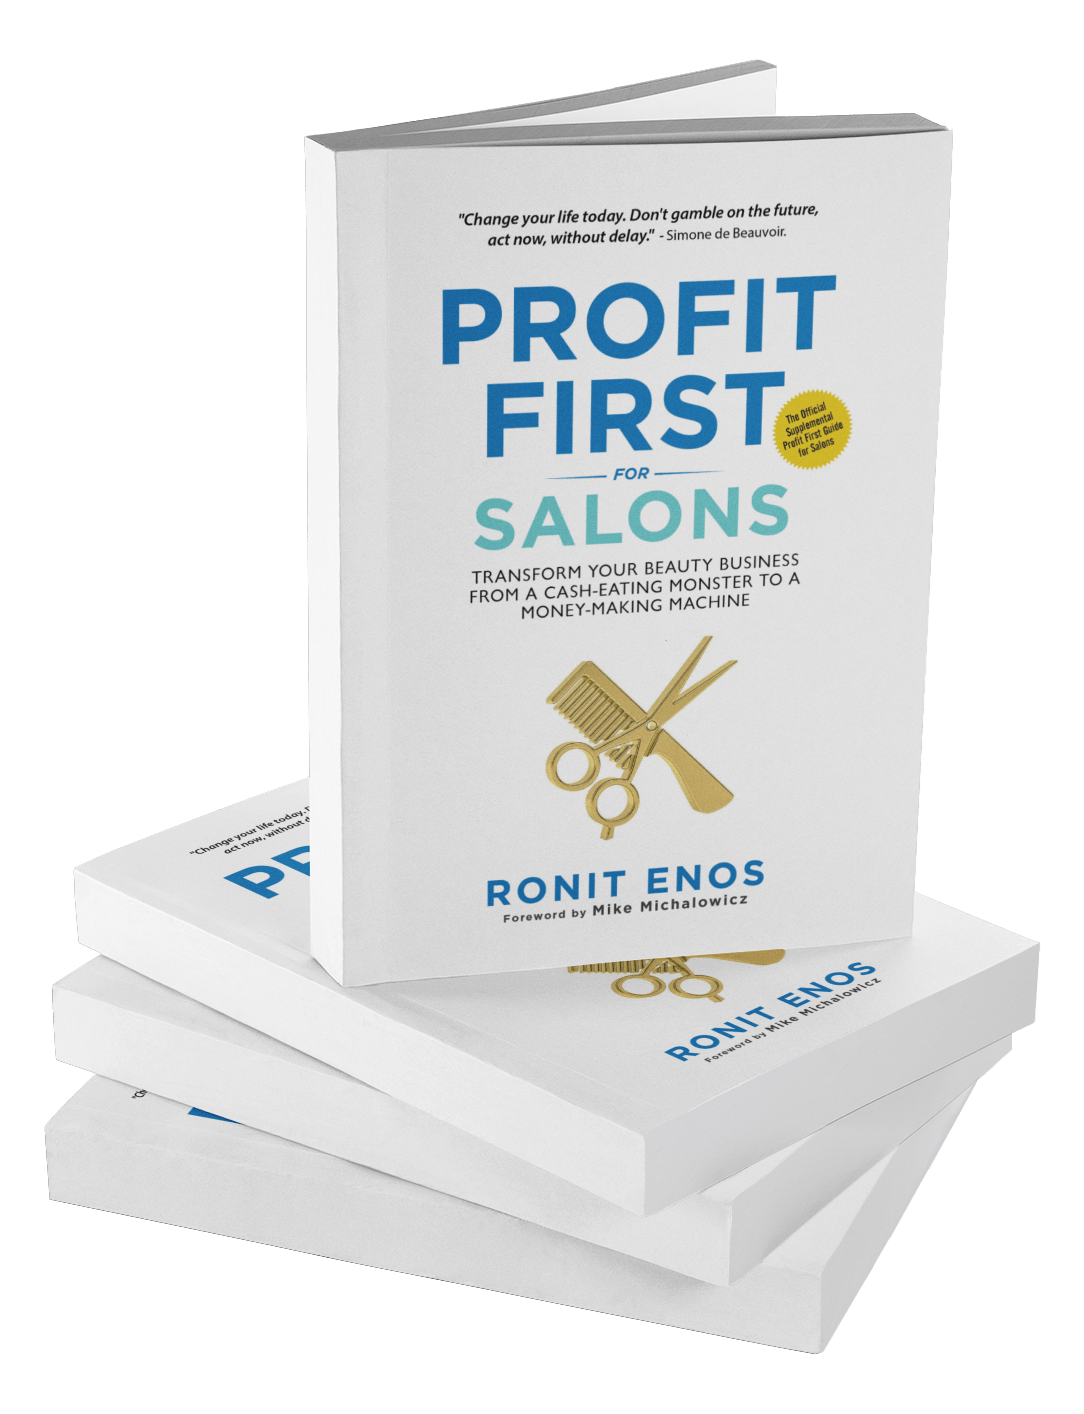 How To Increase Profits With Hair Color Salon Scale